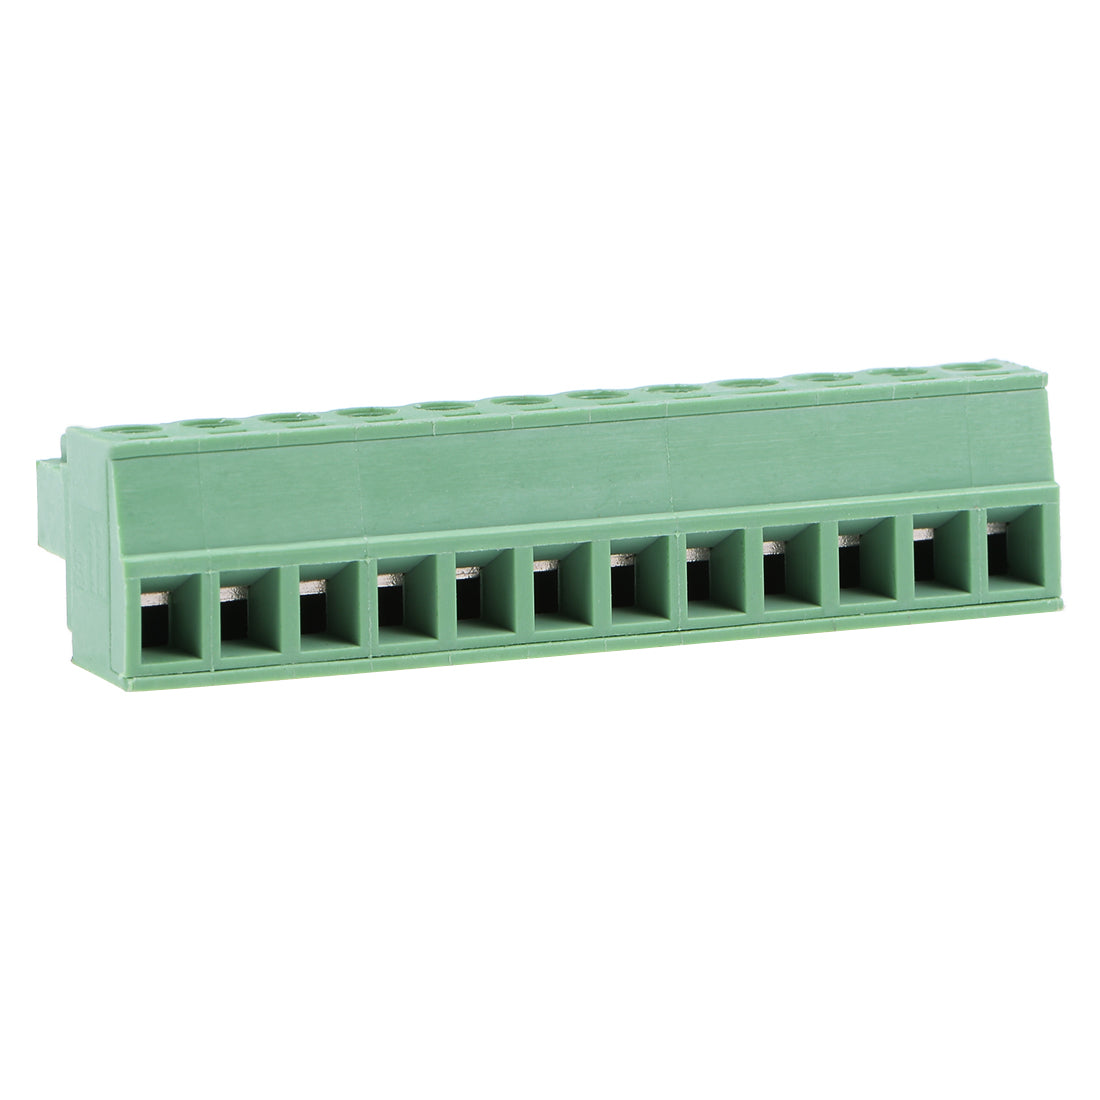 uxcell Uxcell 4Pcs AC300V 8A 3.81mm Pitch 12P Needle Seat Insert-In PCB Terminal Block green